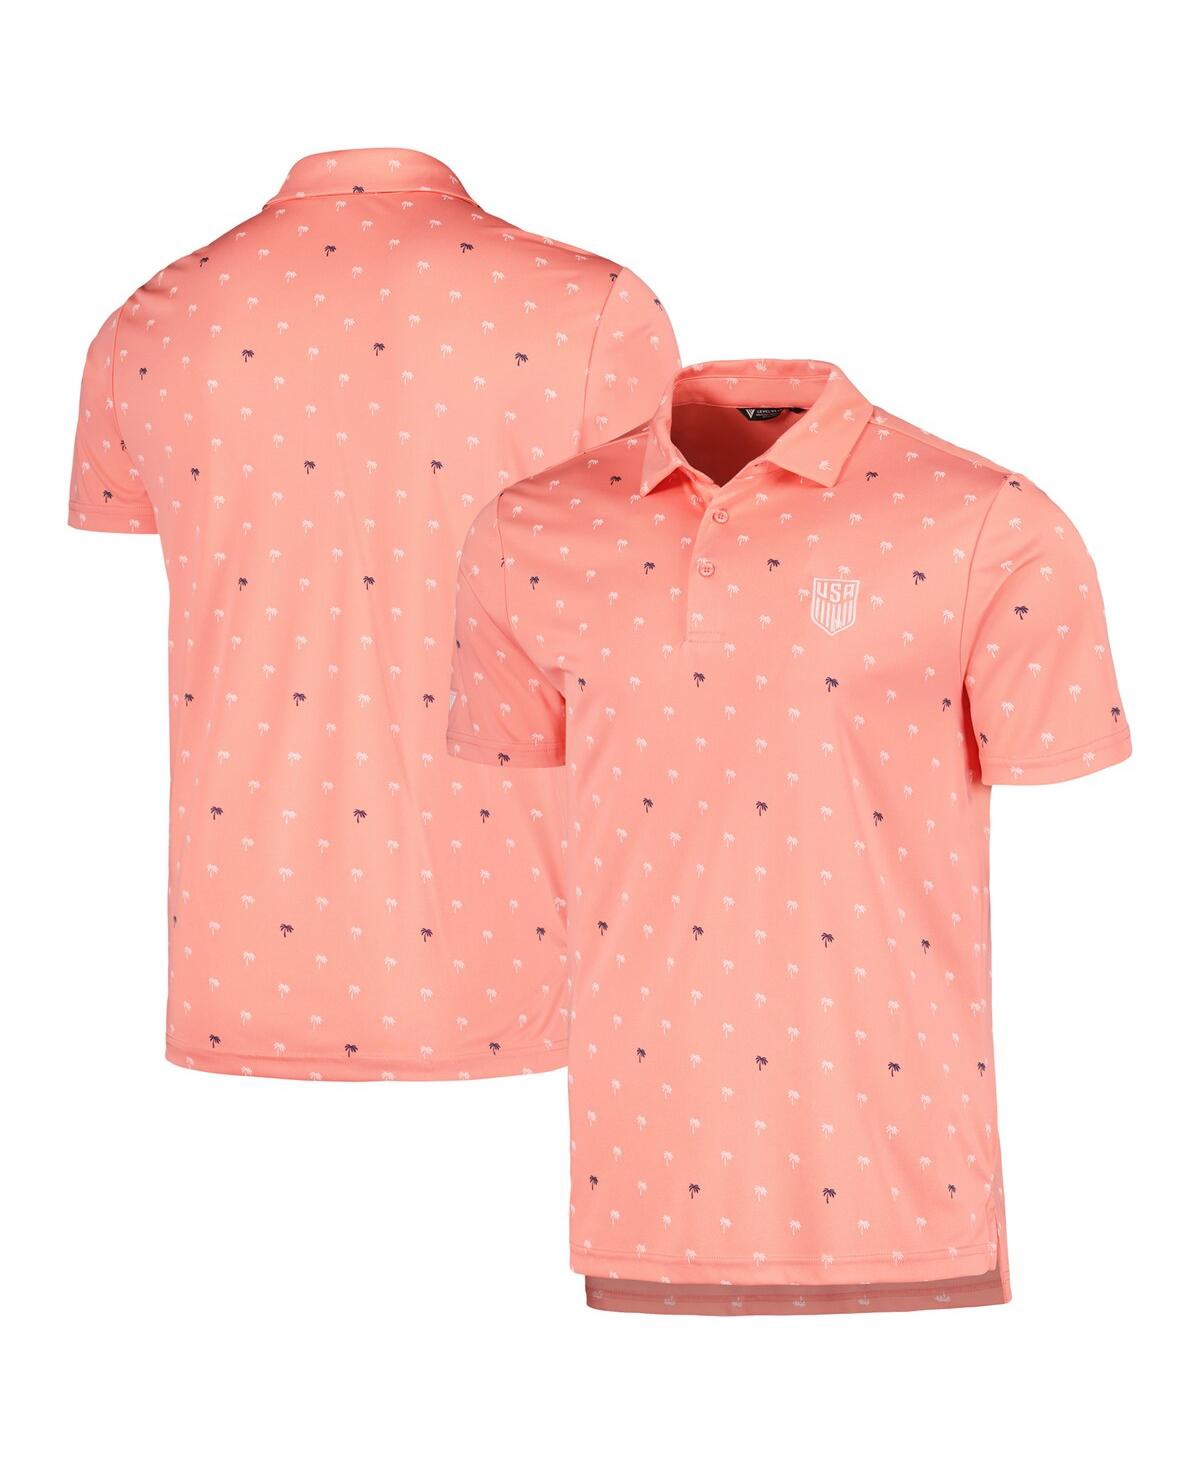 Men's Coral Usmnt Groove Performance Polo - Coral